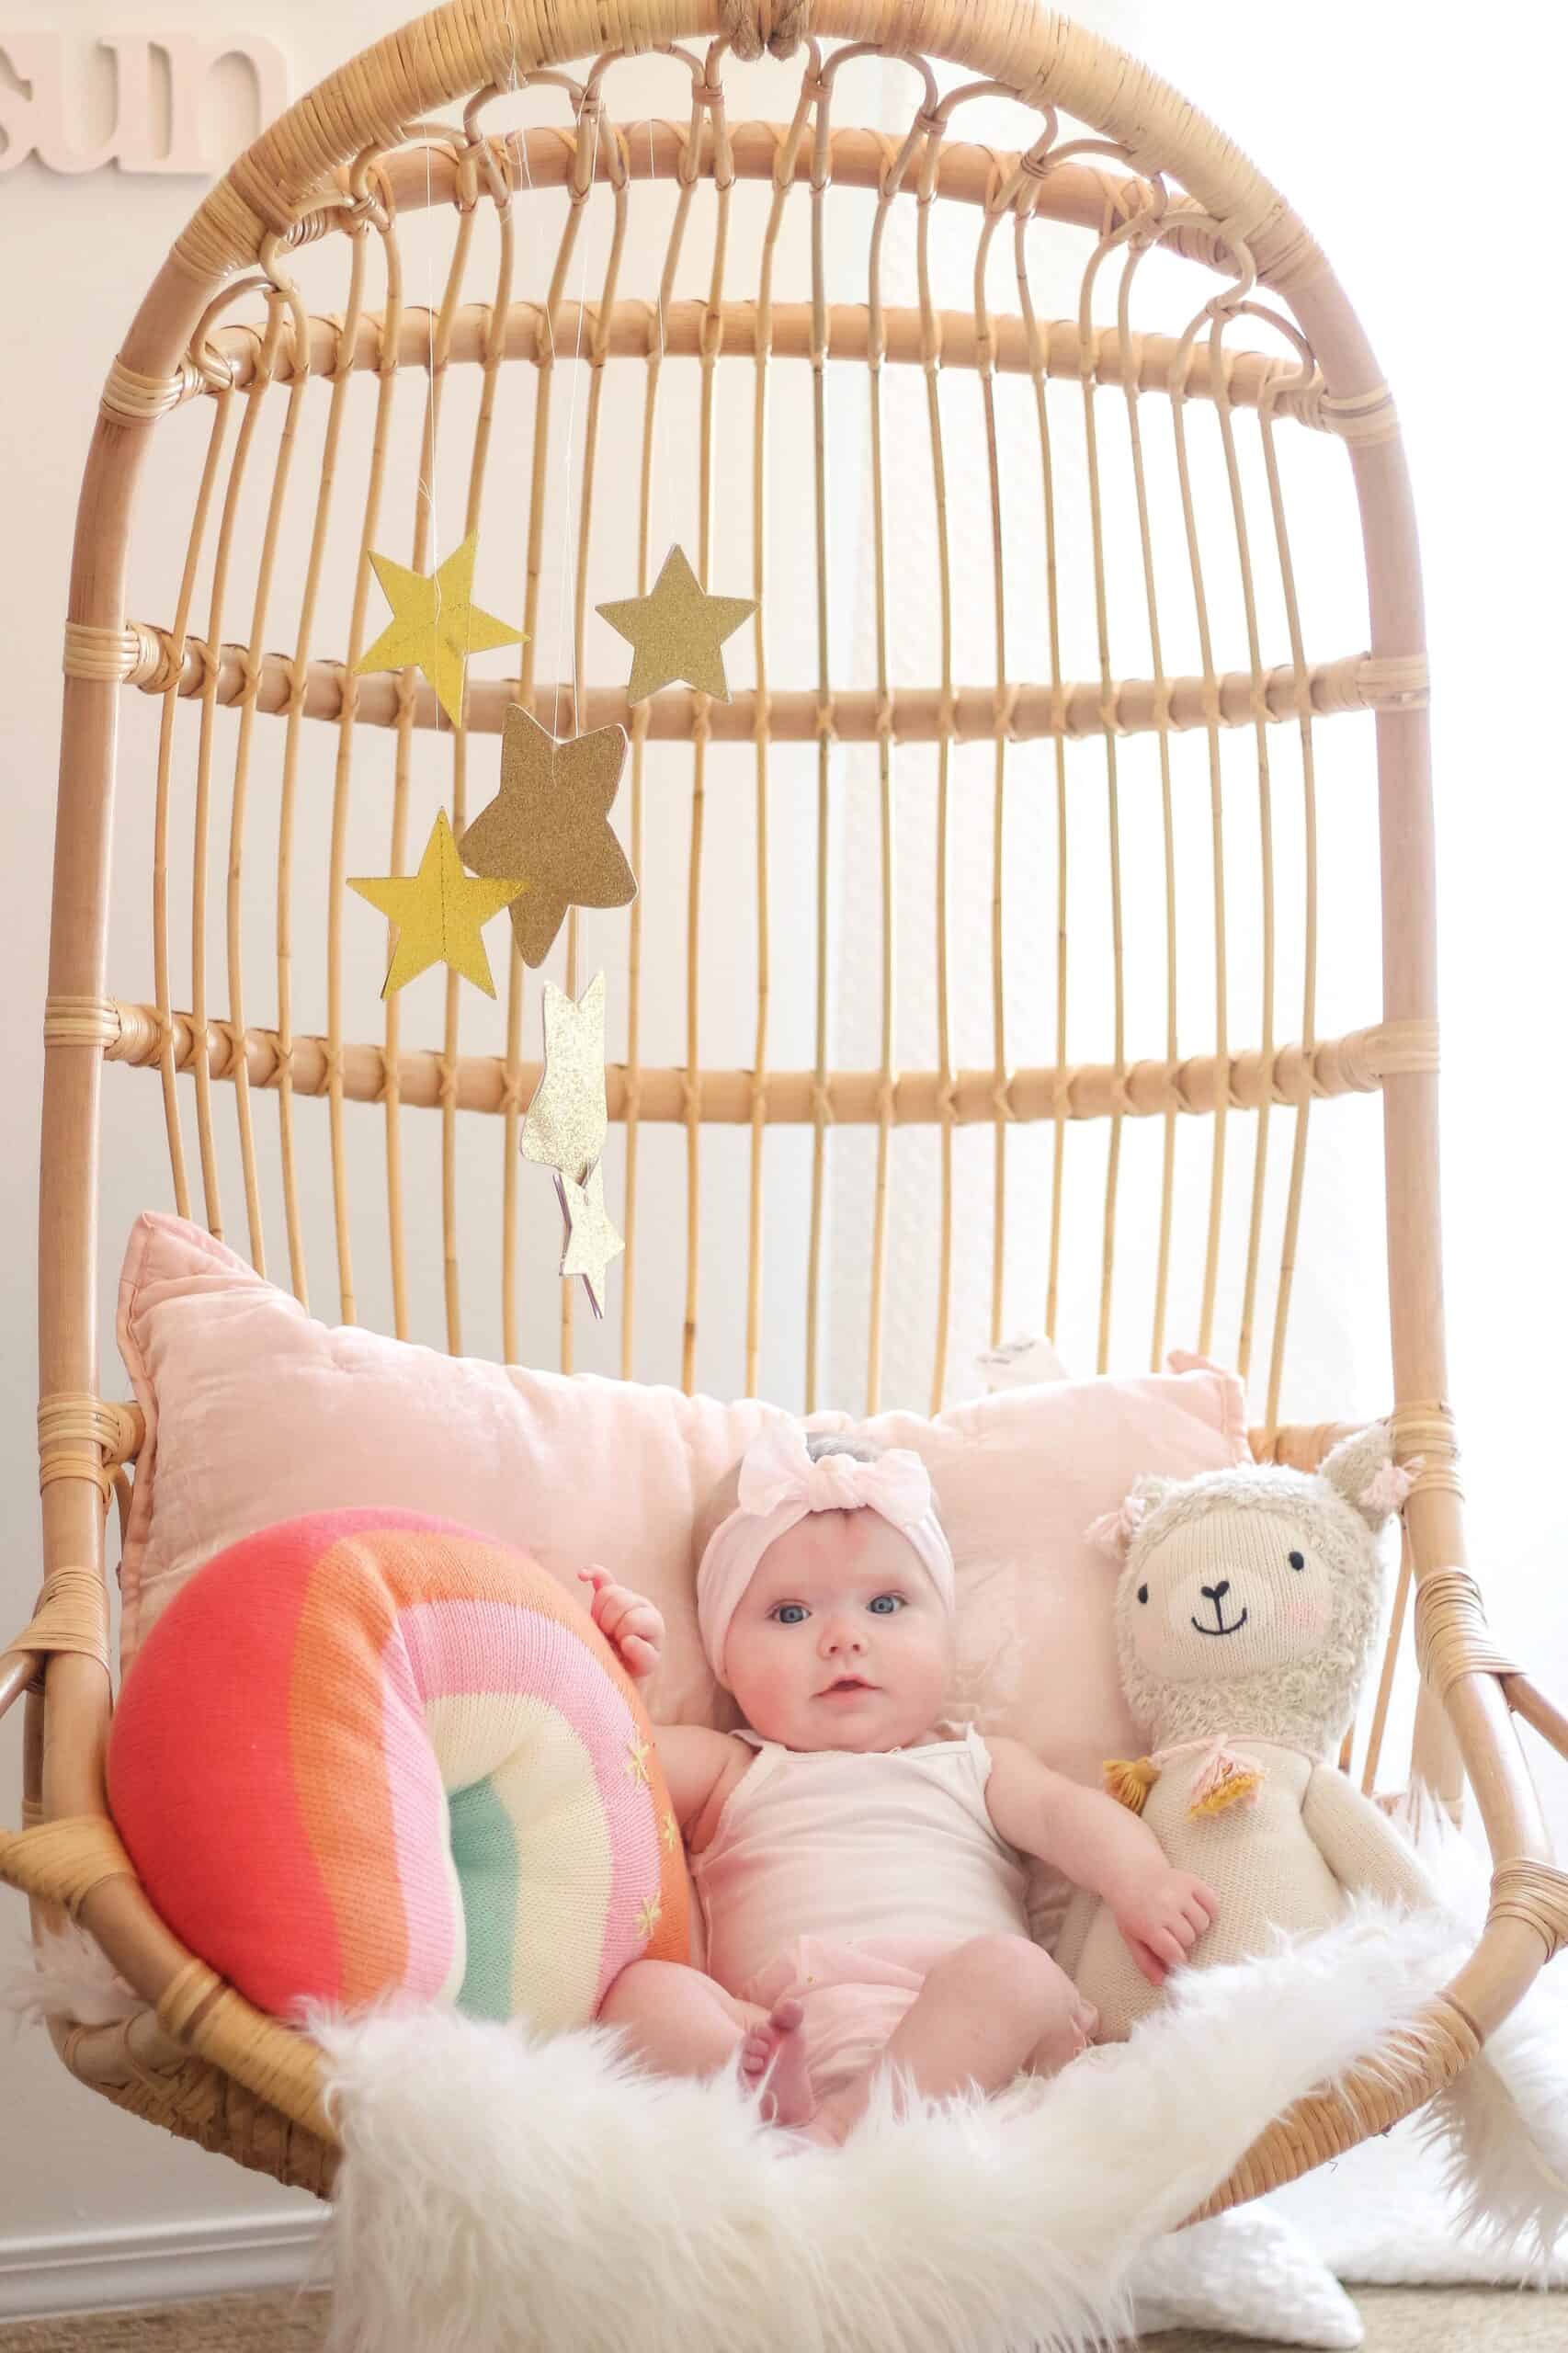 6 month old baby in Serena and lily hanging chair